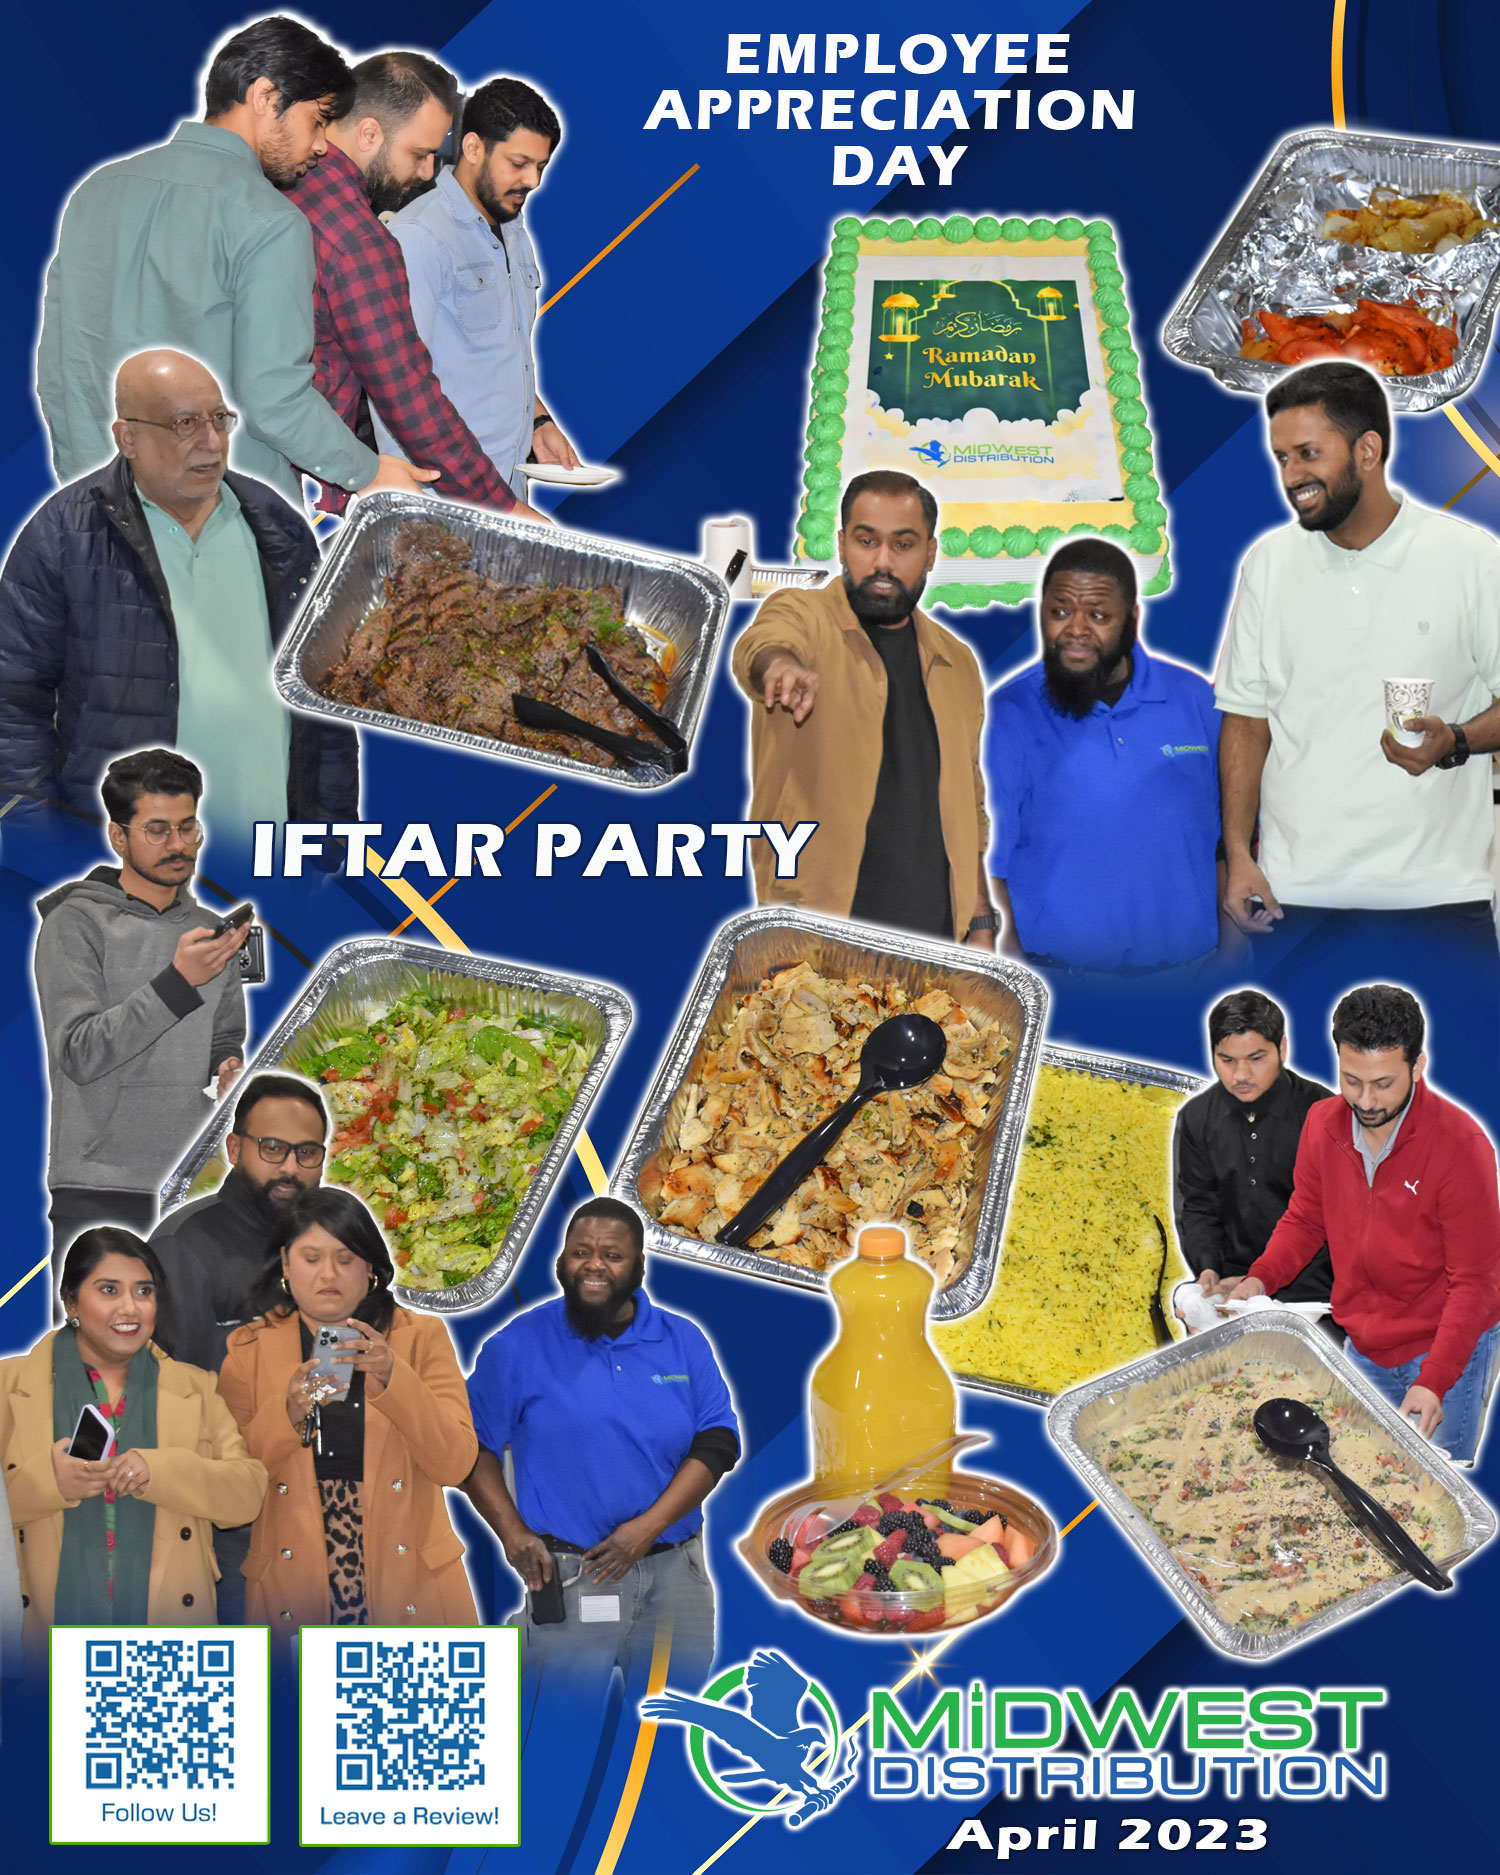 midwest-distribution-april-2023-employee-appreciation-day-iftar-r.jpg